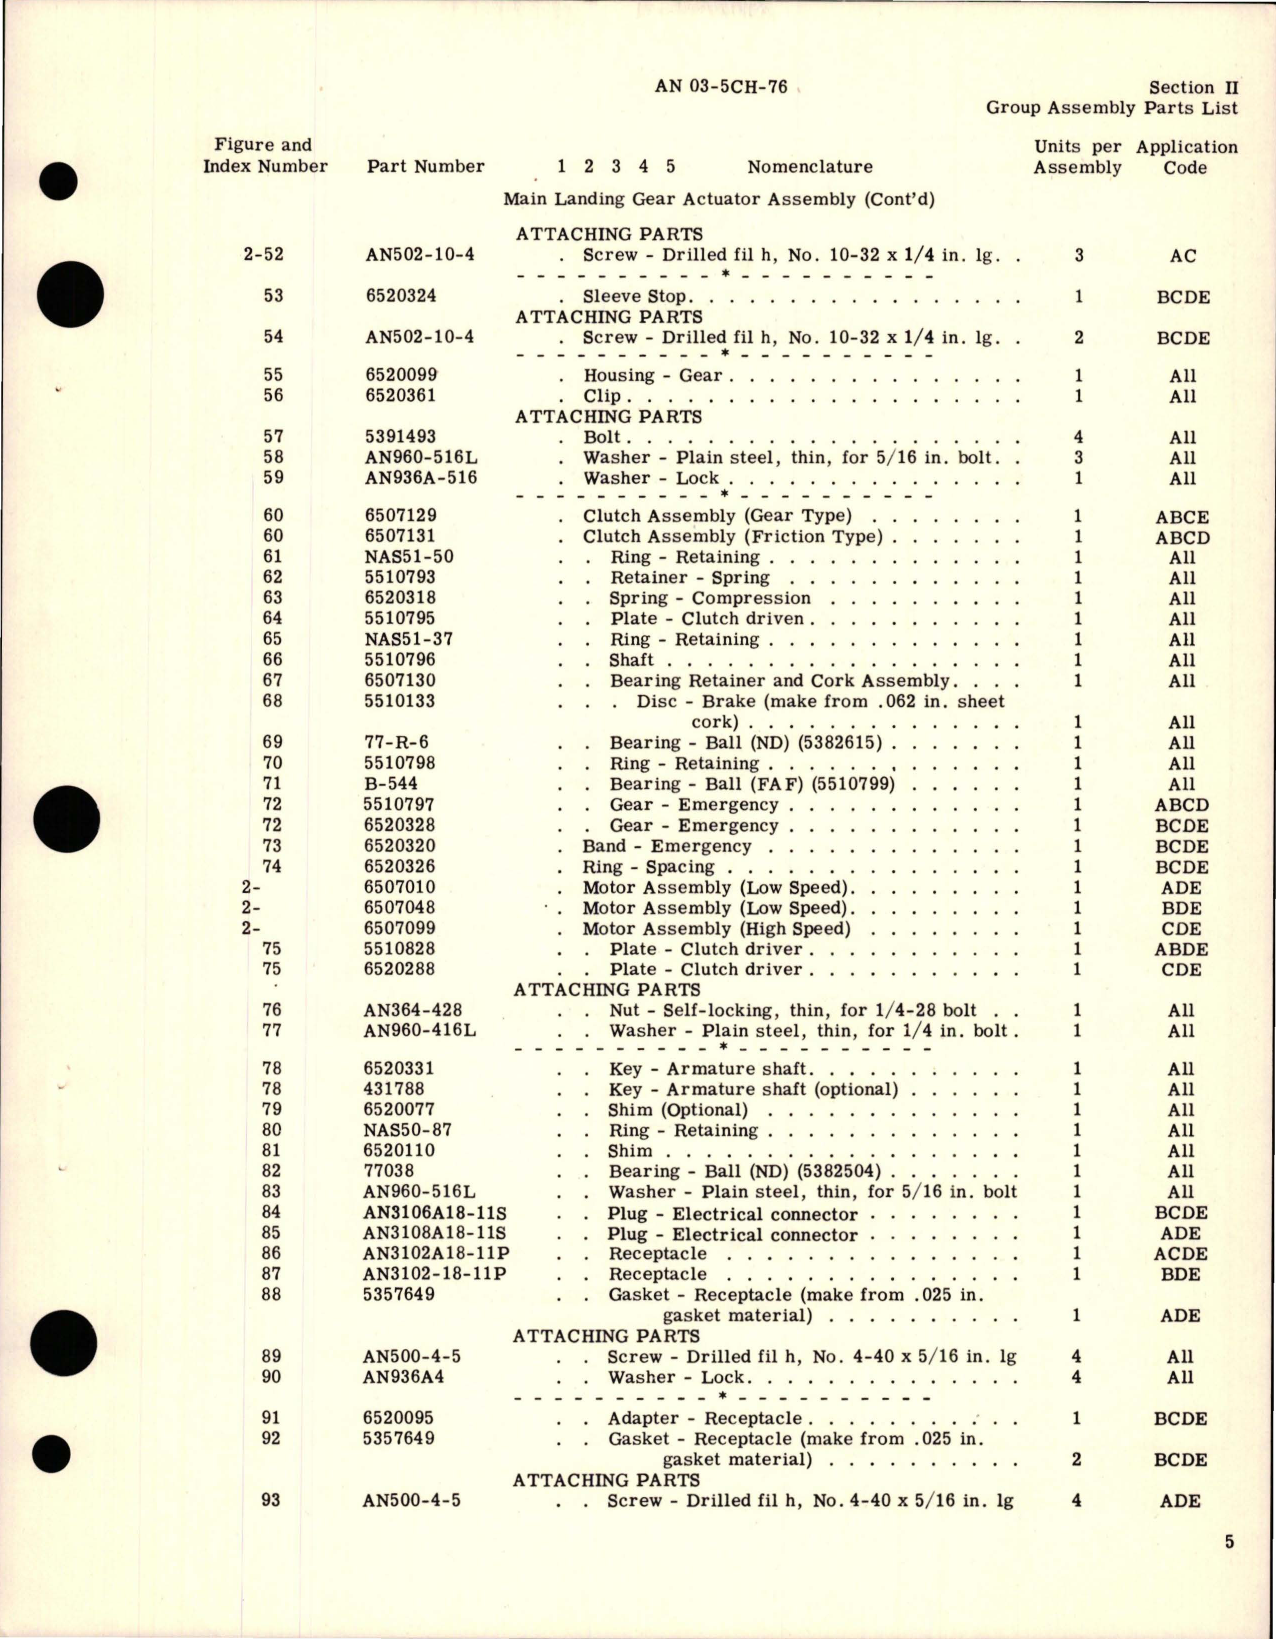 Sample page 9 from AirCorps Library document: Parts Catalog for Actuators